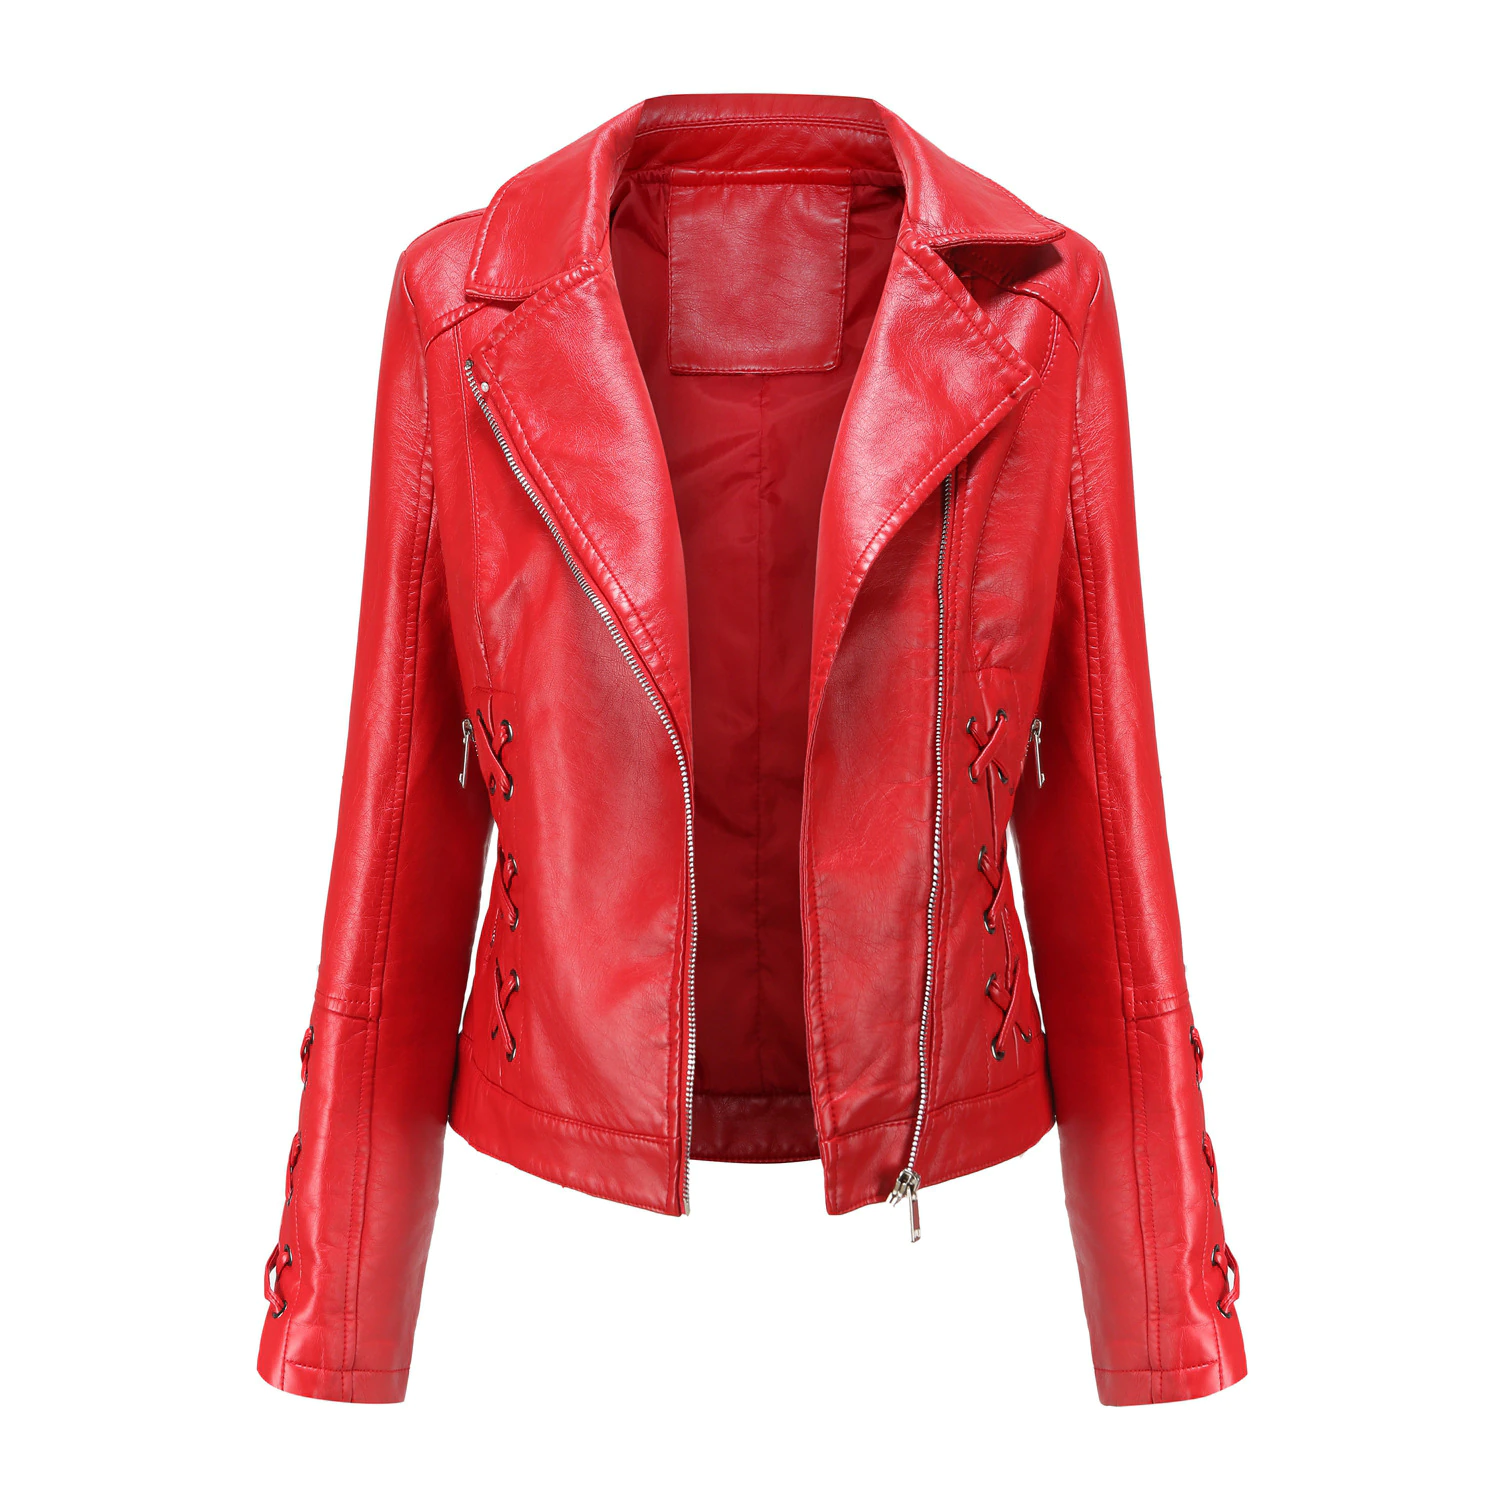 New Ladies Fashion Woven Lace-up Leather Jacket Women Daily Casual Fashion Casual Jacket Women